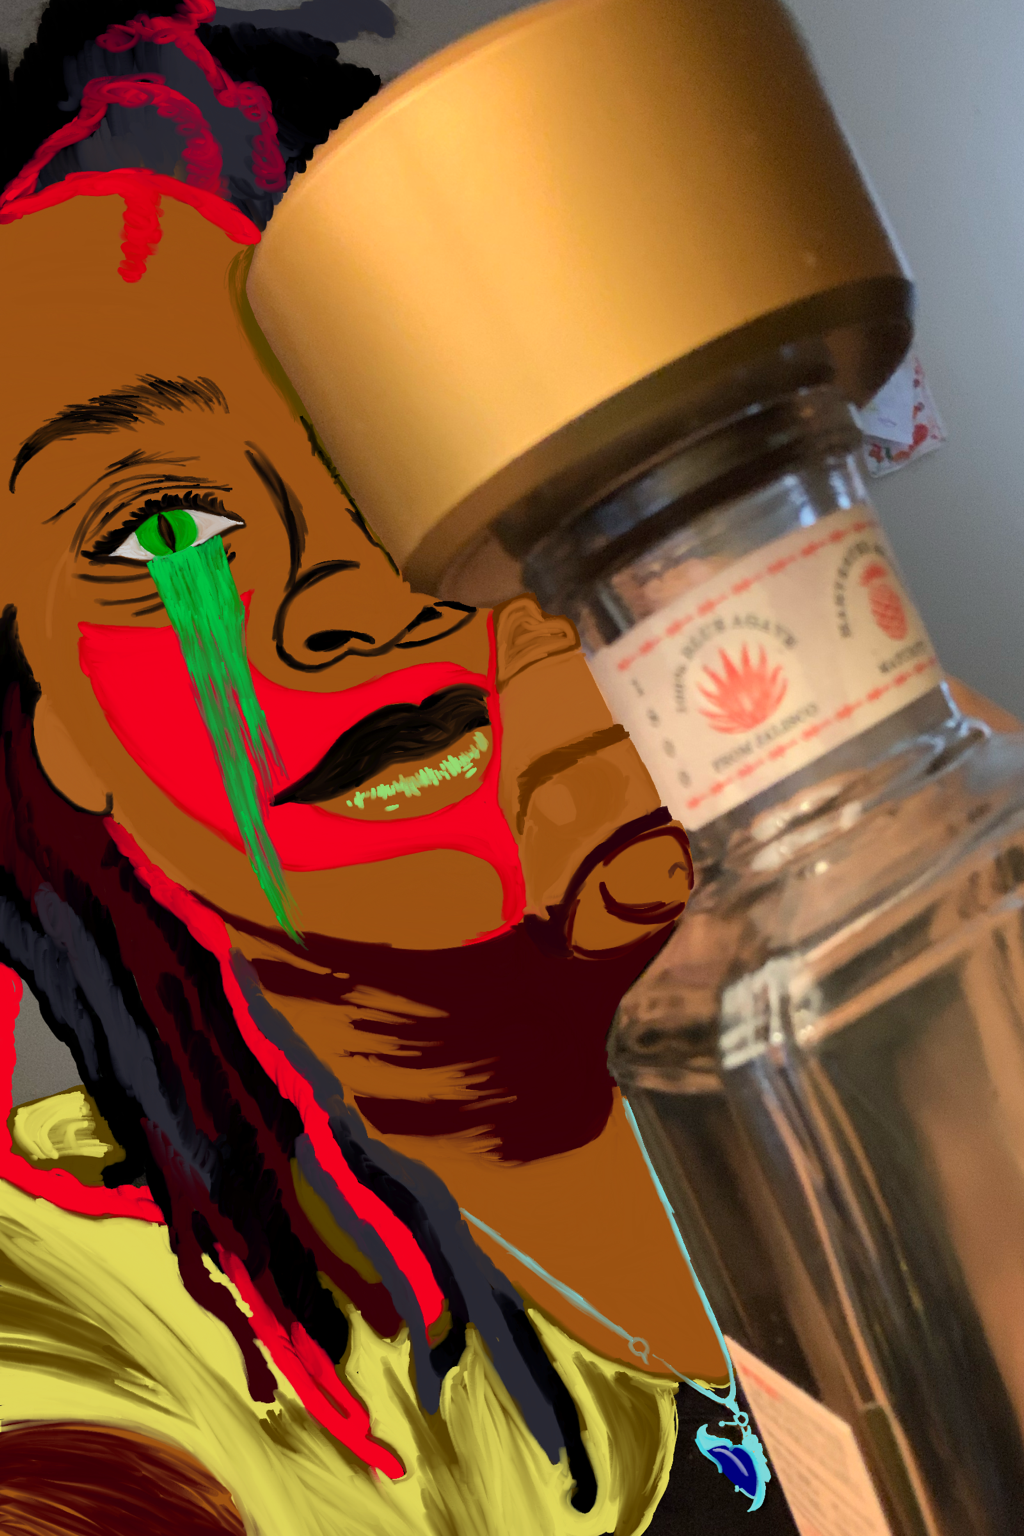 Crying black girl sitting next to an empty bottle of tequila with vivid demon eyes.